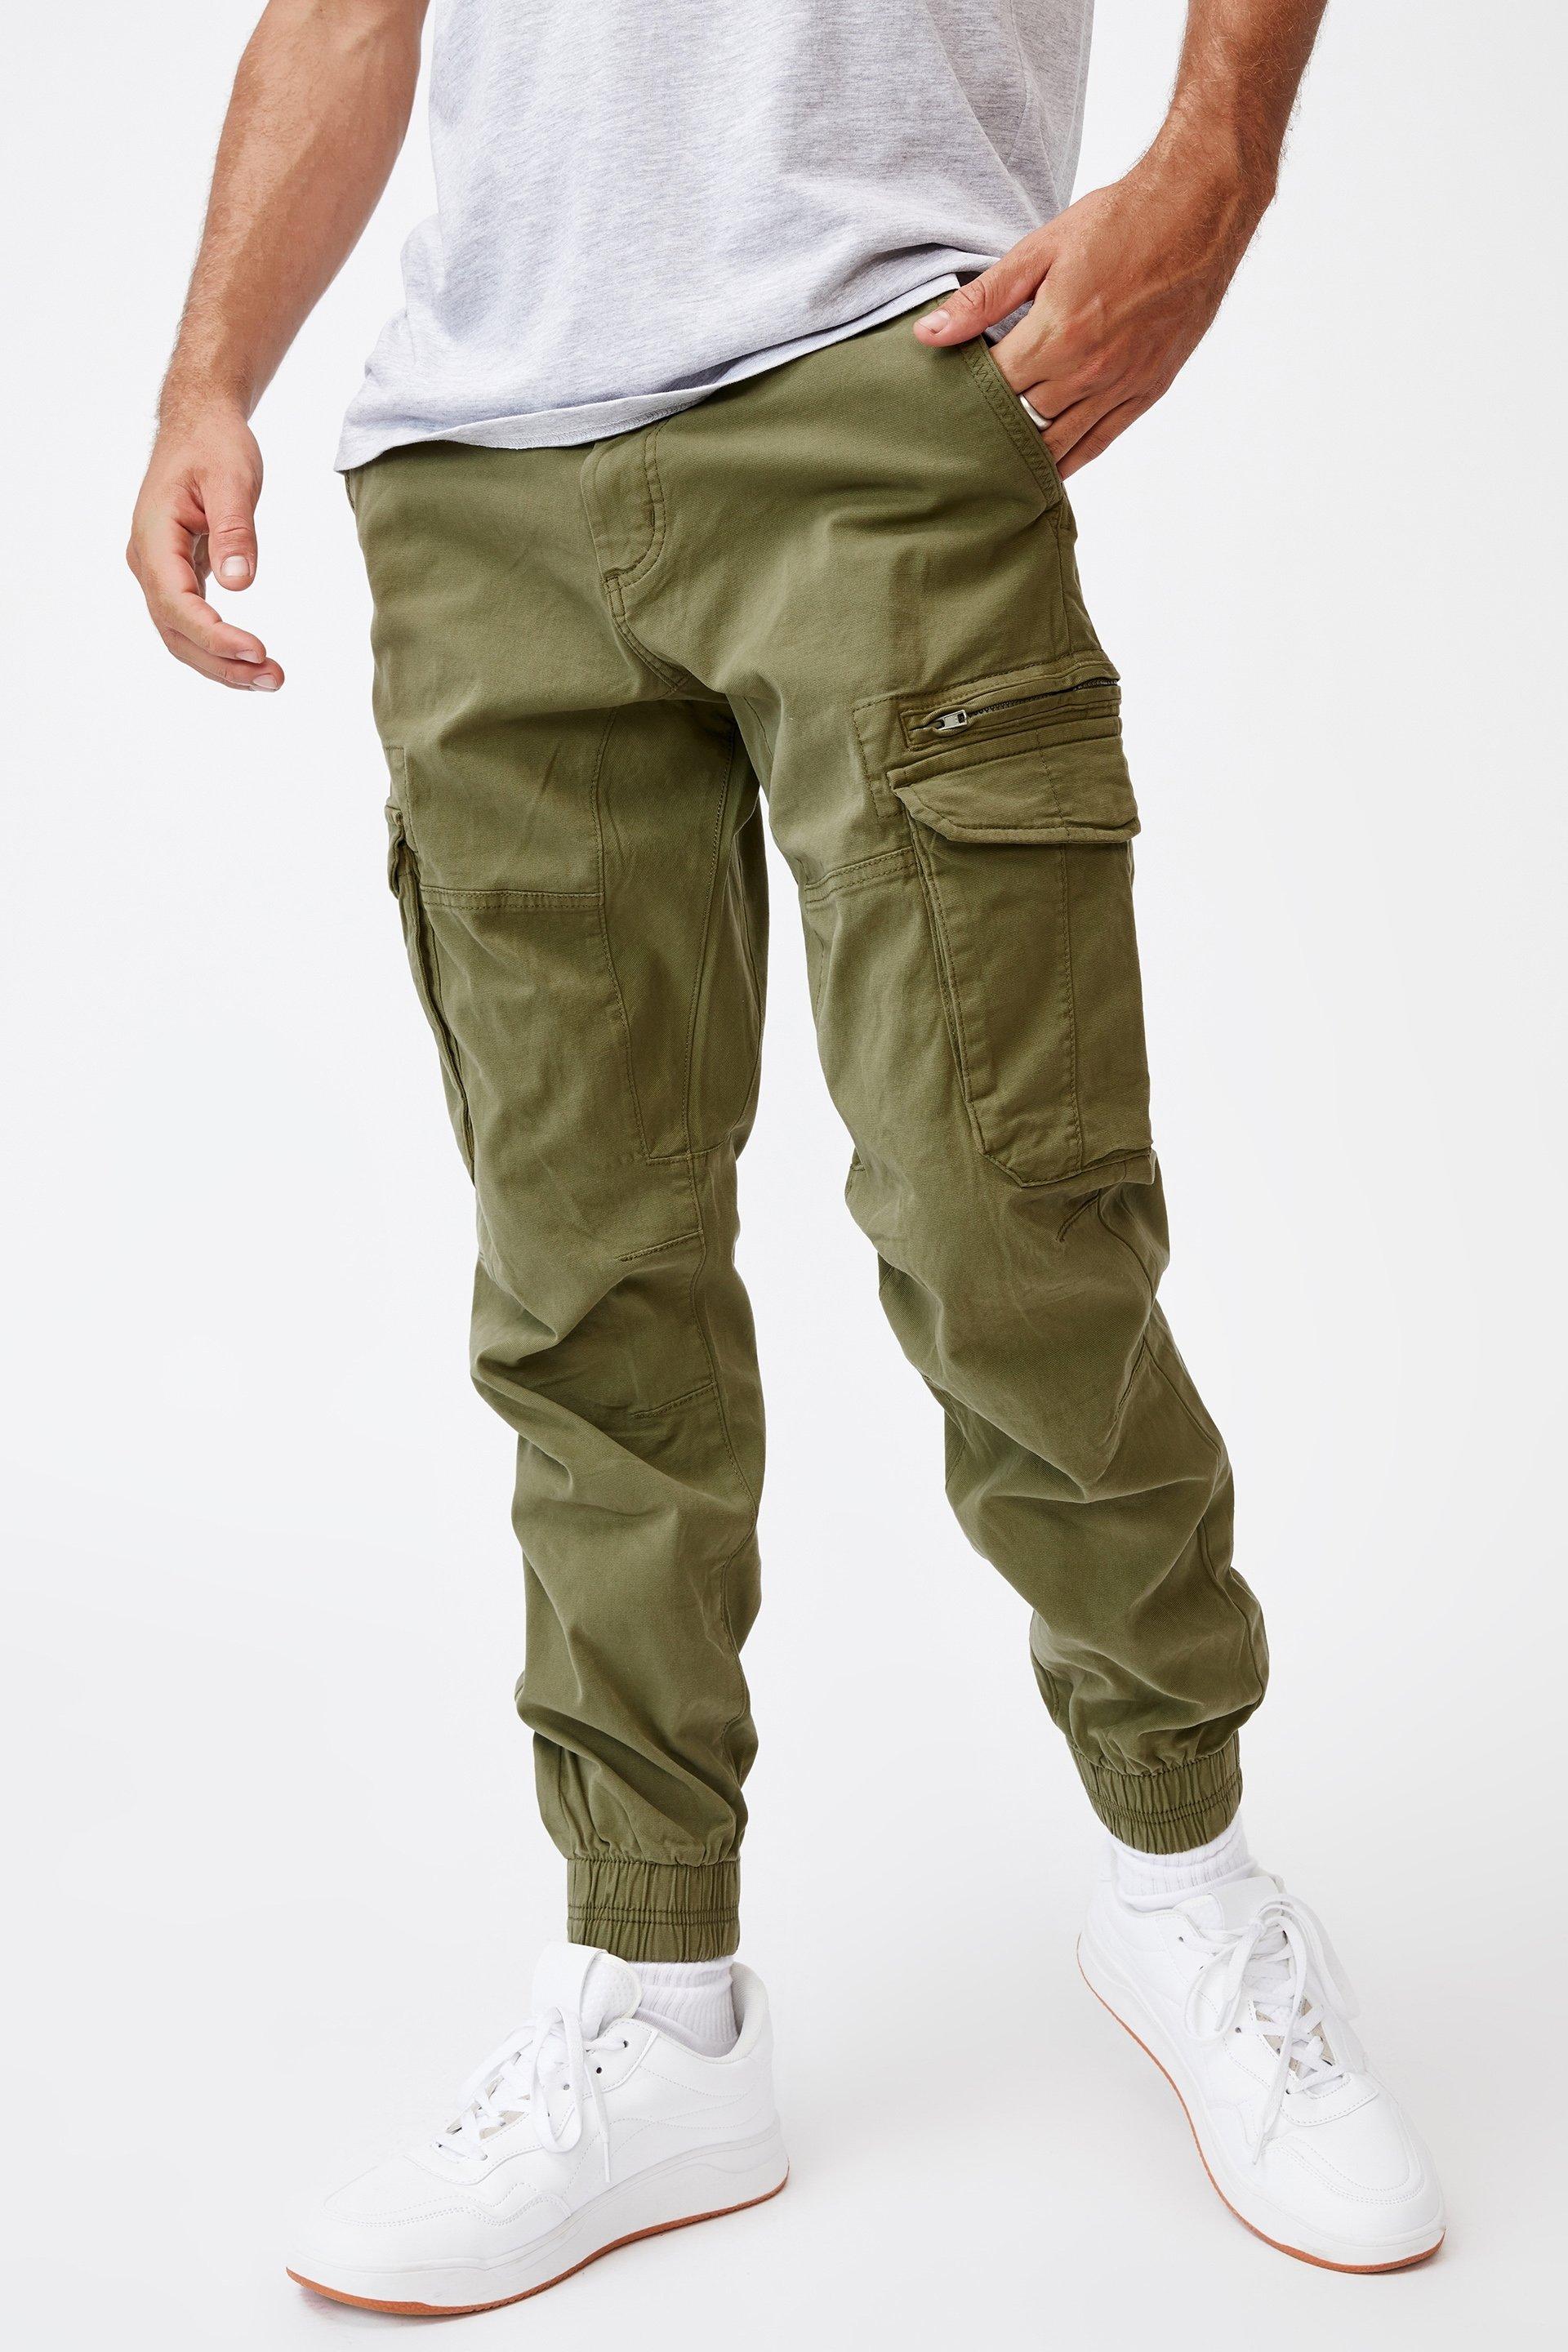 Urban jogger - army green cargo Cotton On Pants & Chinos | Superbalist.com